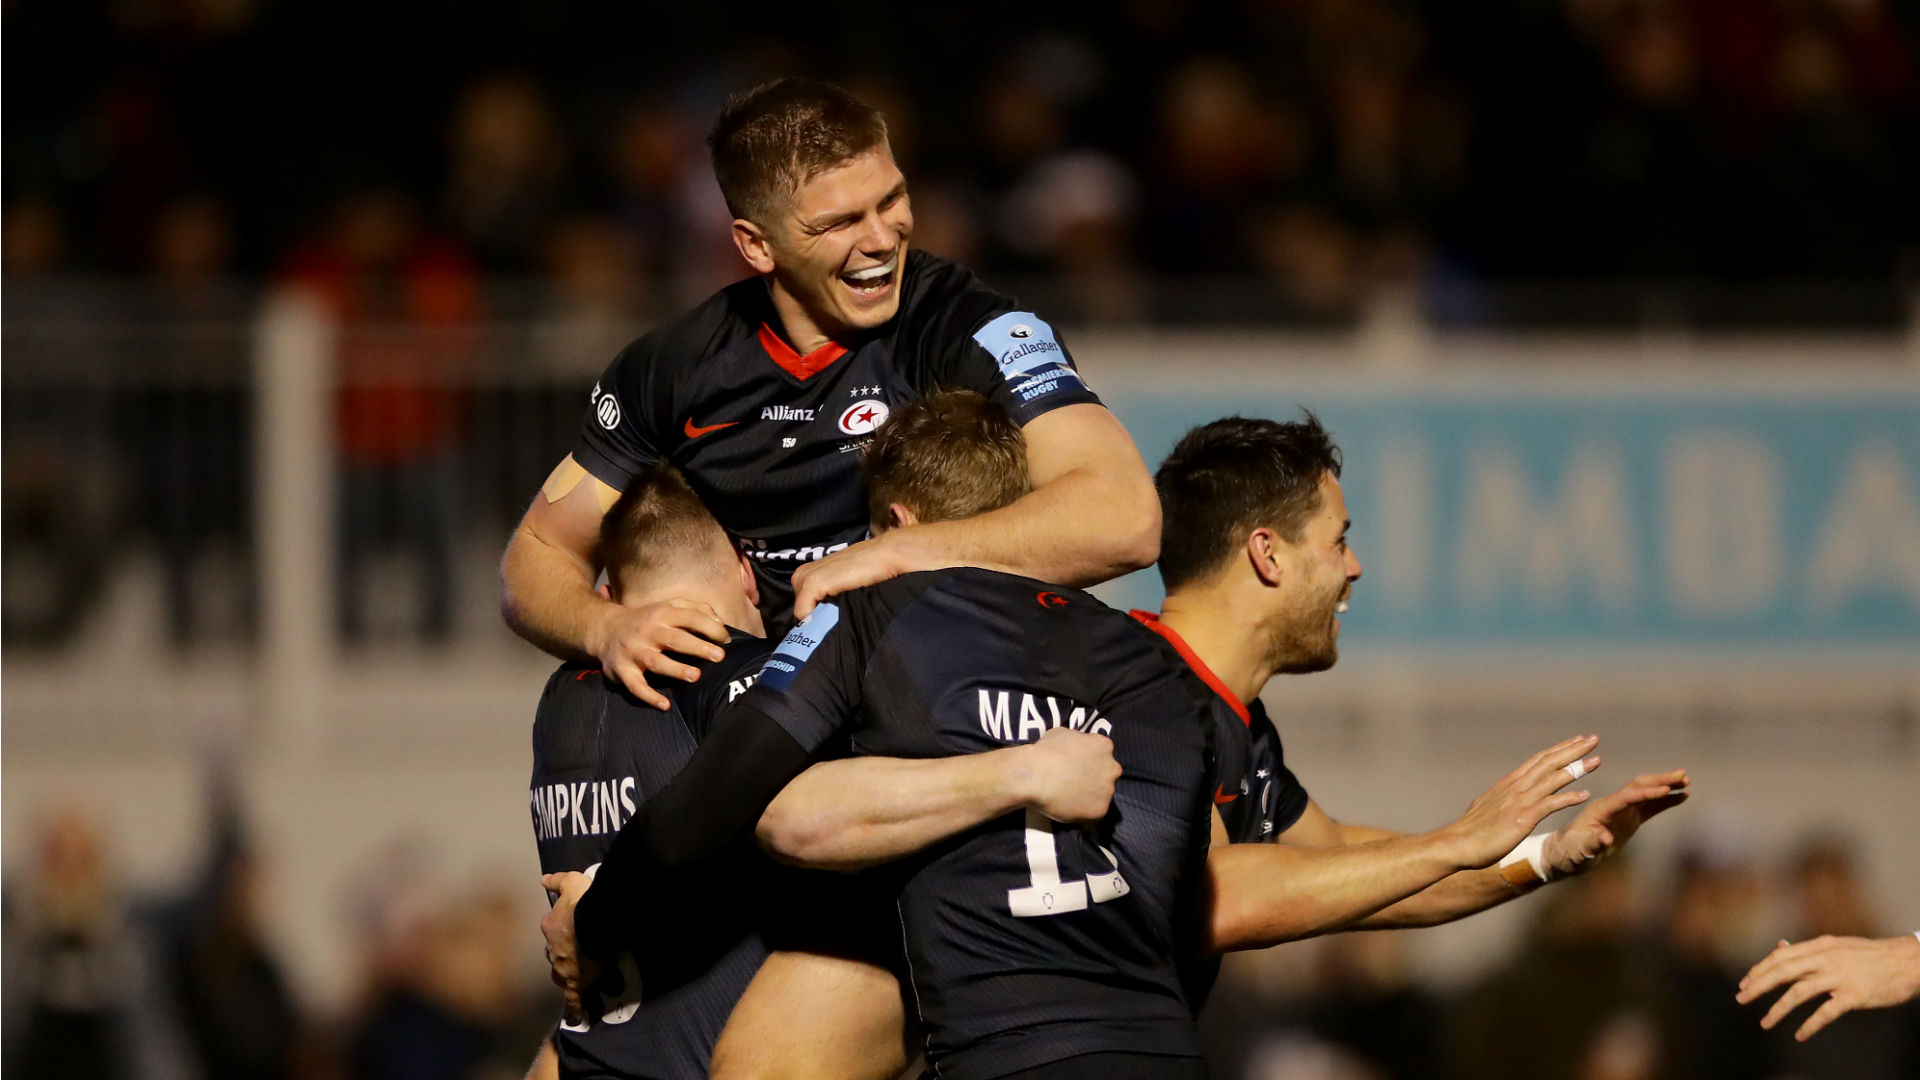 Saracens claims fifth straight Premiership win